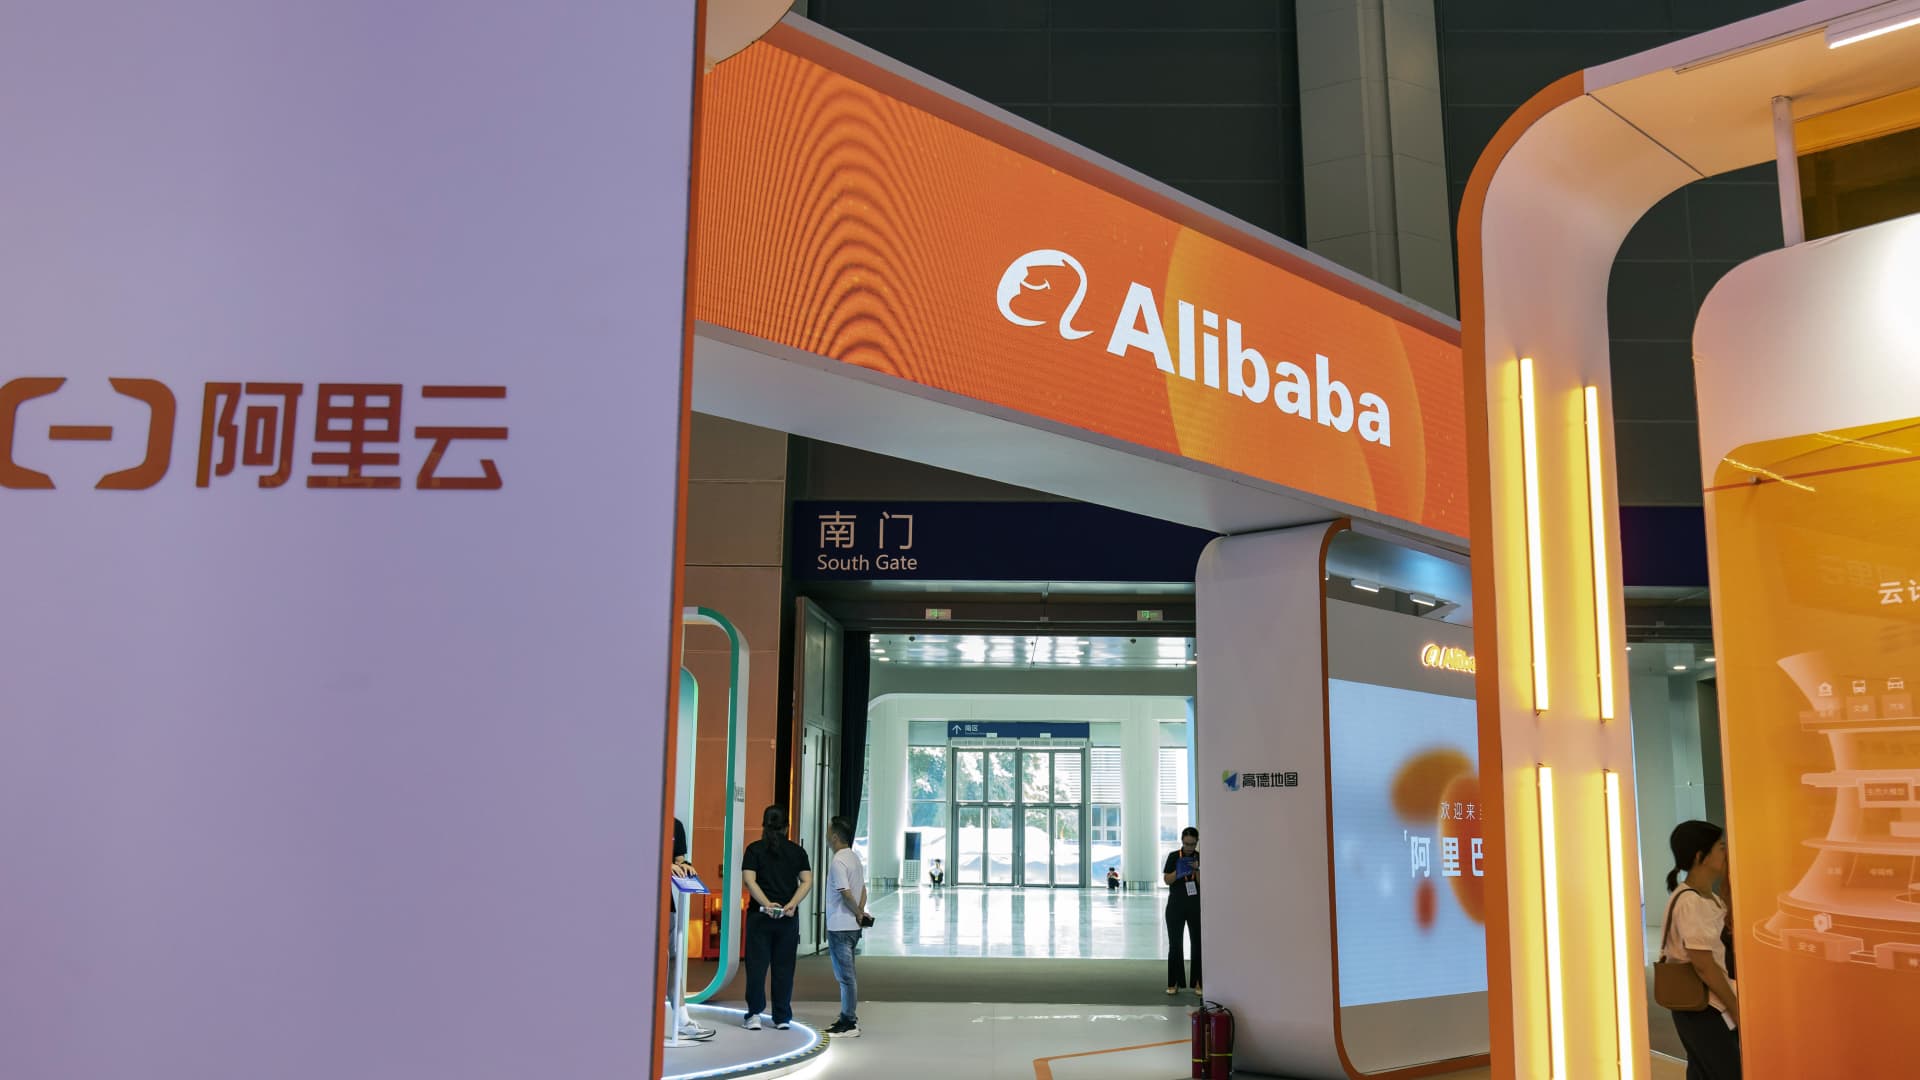 Alibaba shares slide over 8% after it disappoints on profit, curbs cloud spinoff